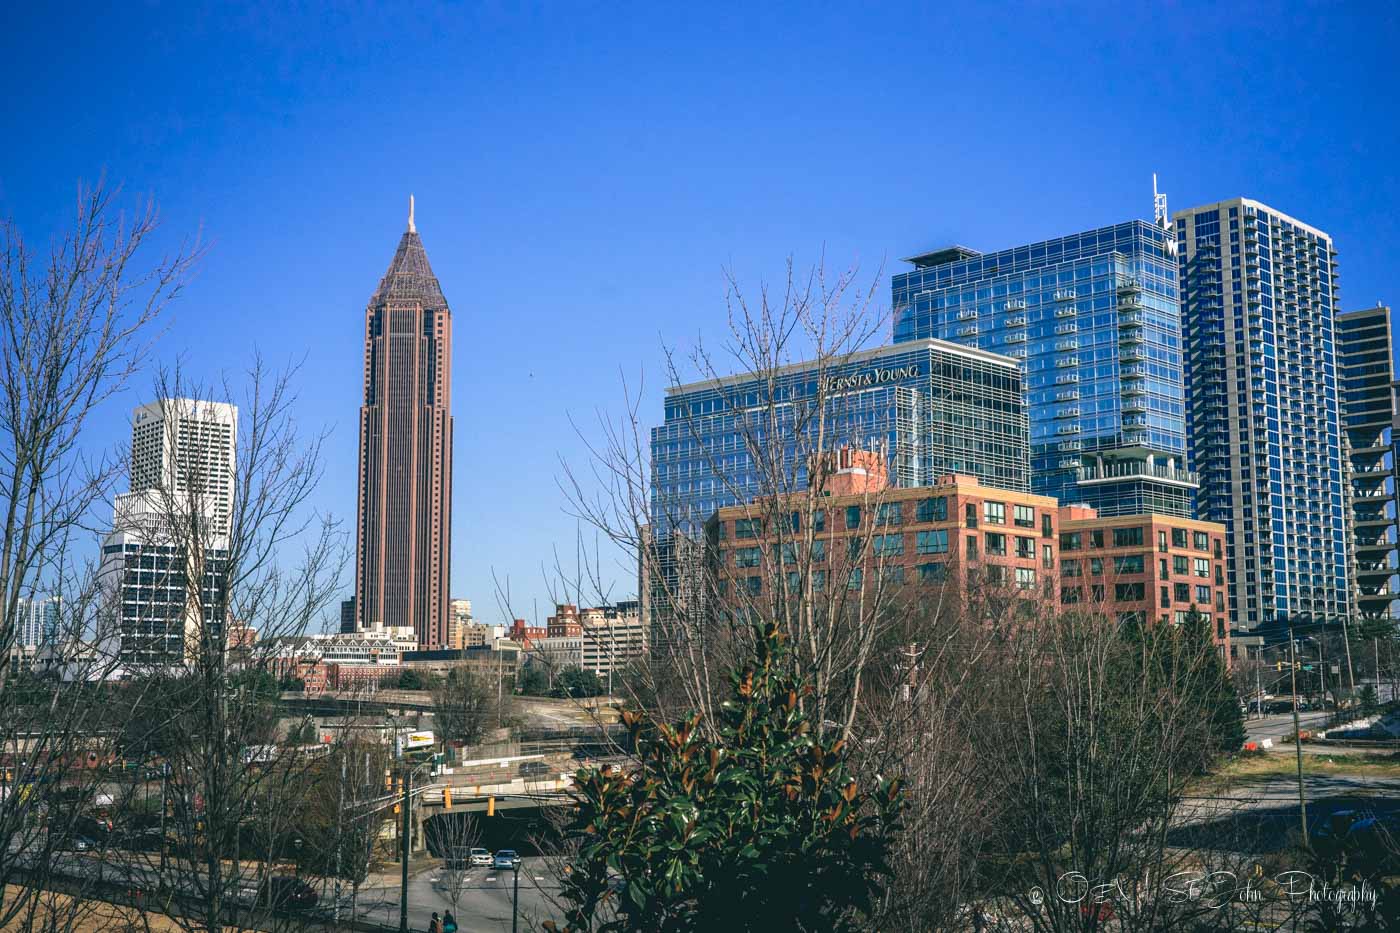 Sunday City Guide: What To Do in Atlanta